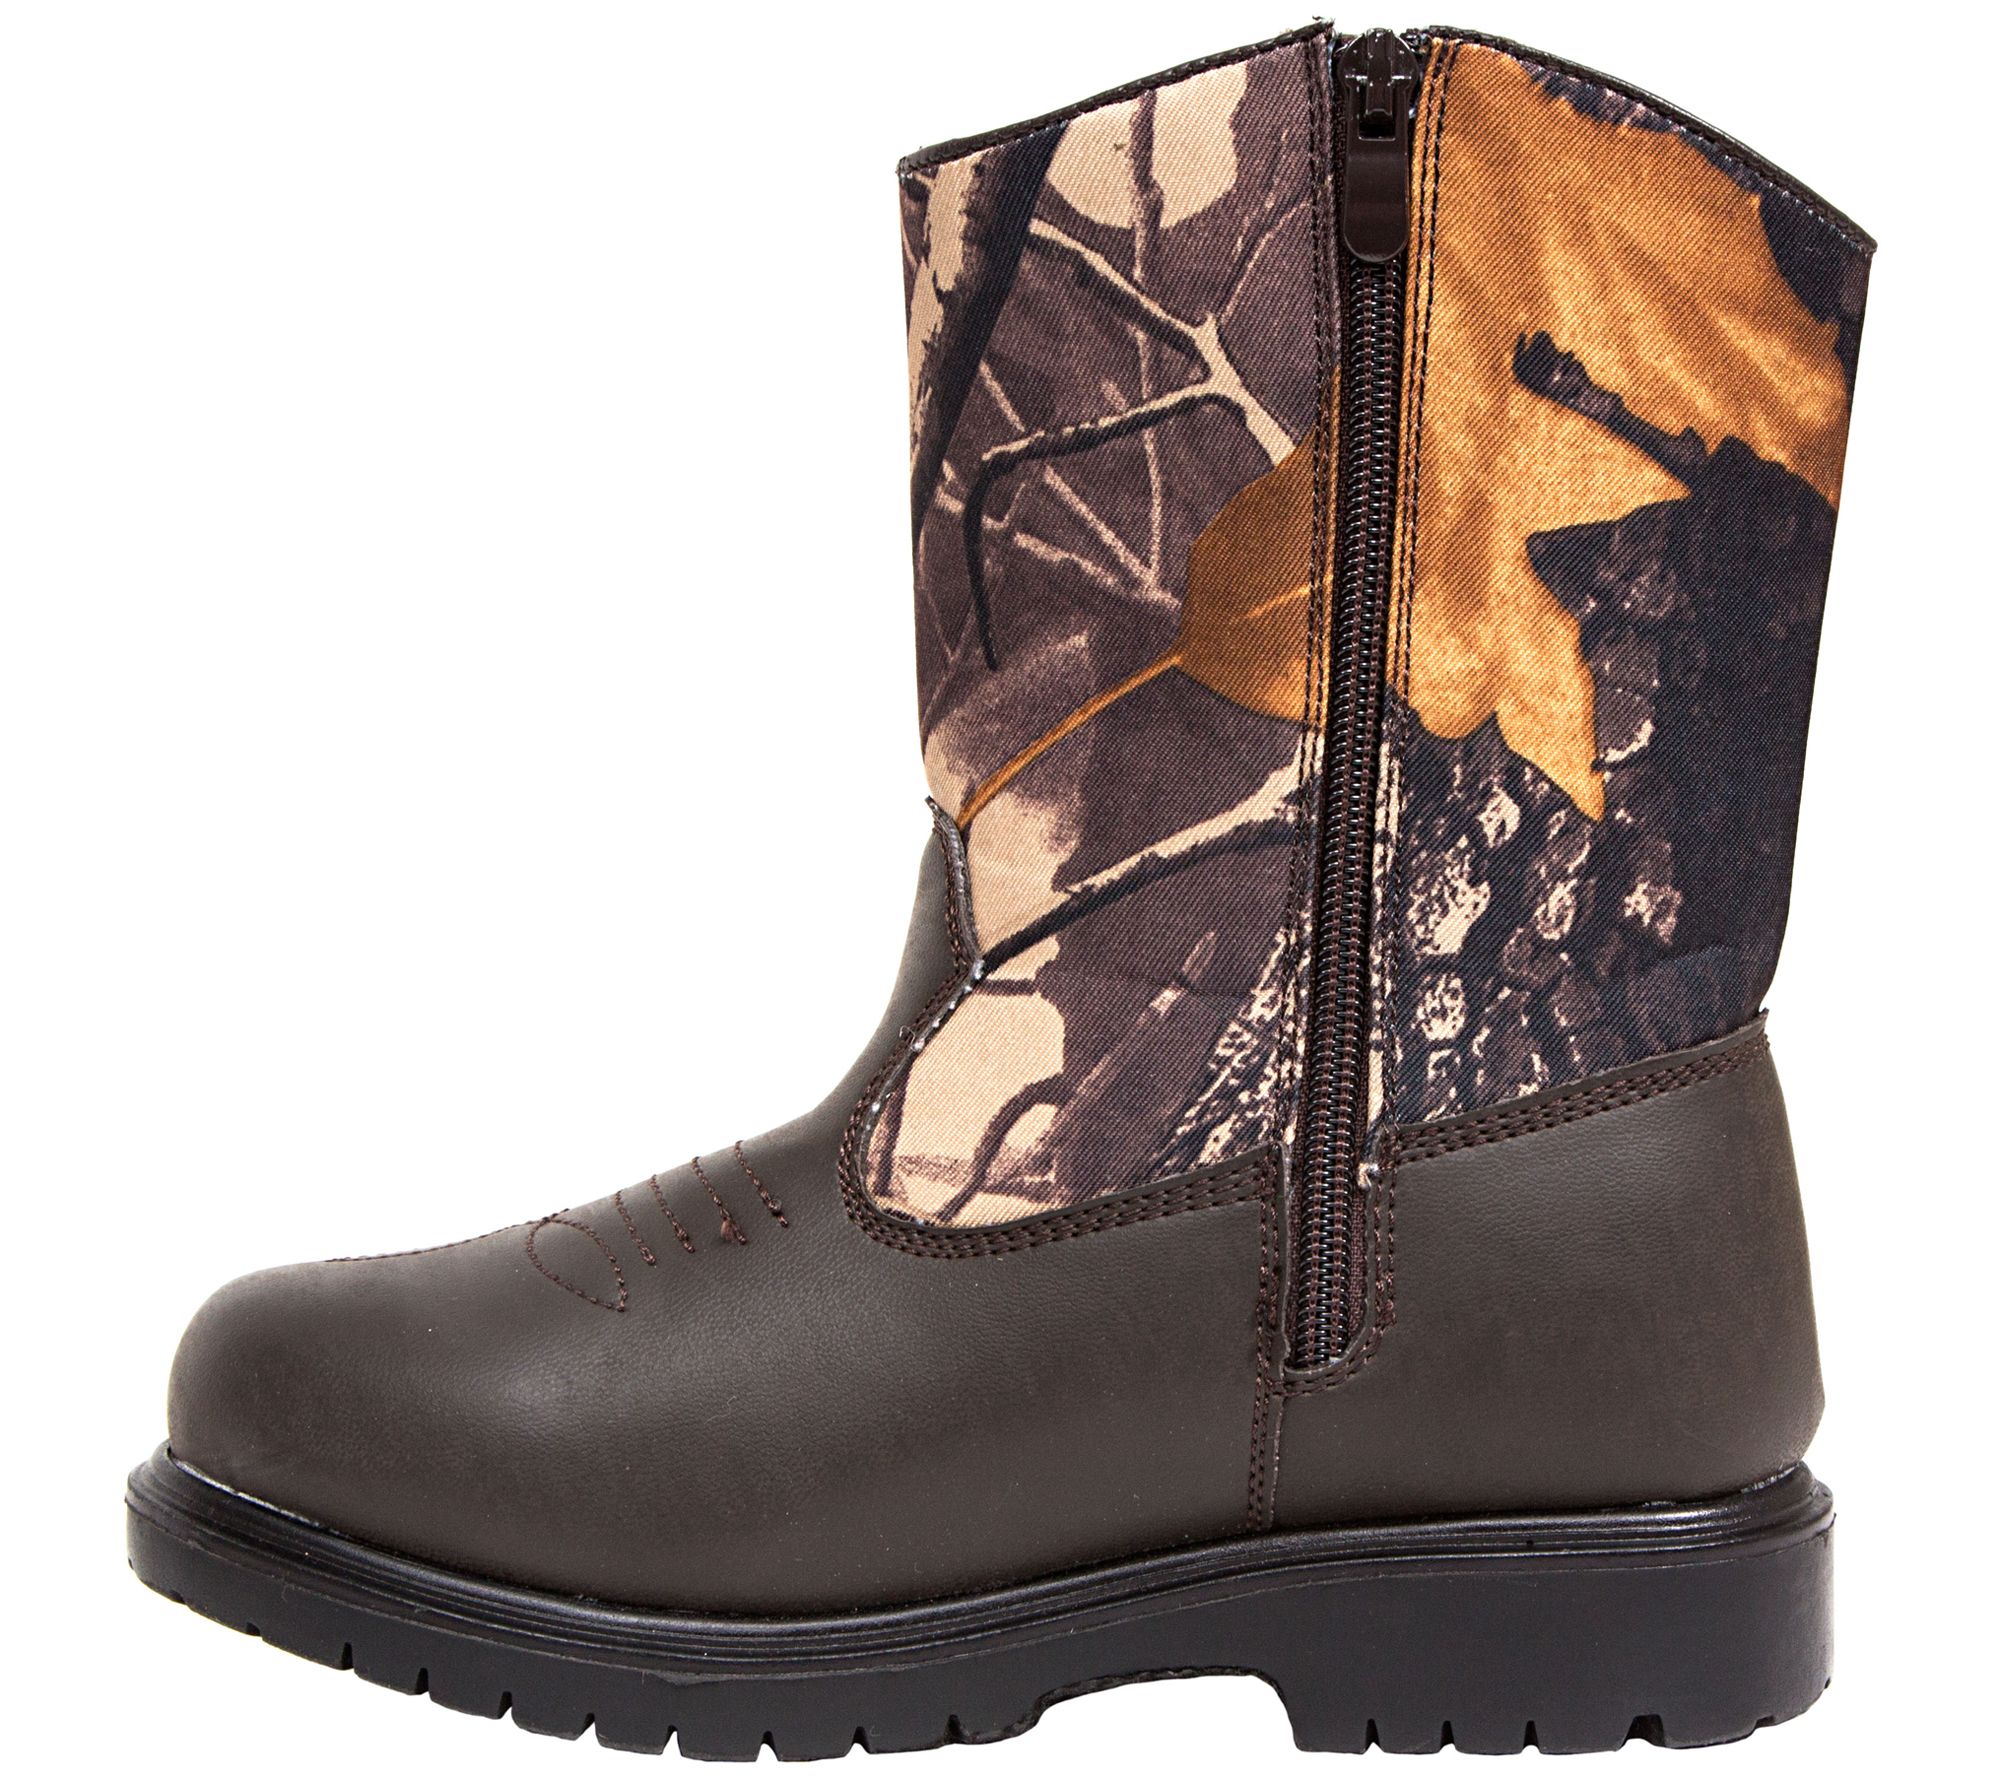 Deer Stags Boy's Thinsulate Water-Resistant Boots - Tour - QVC.com